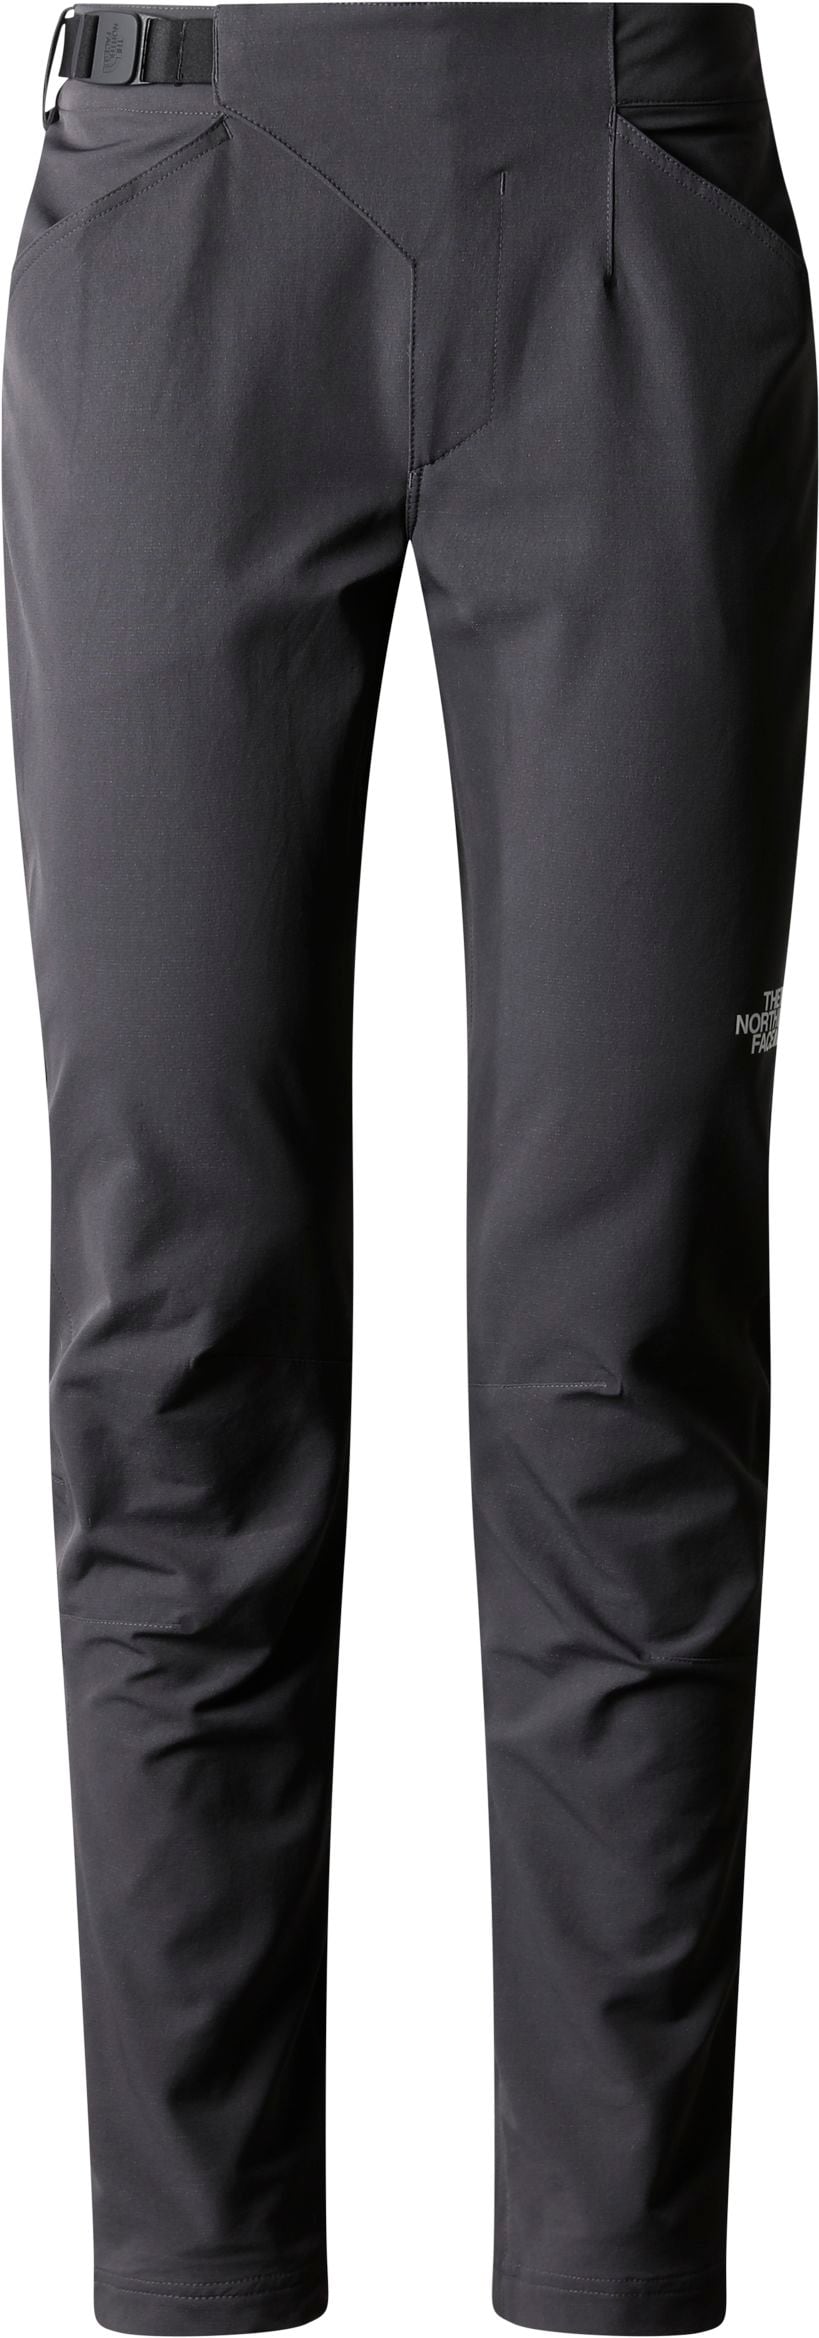 THE NORTH FACE, W AO WINTER SLIM STRAIGHT PANT